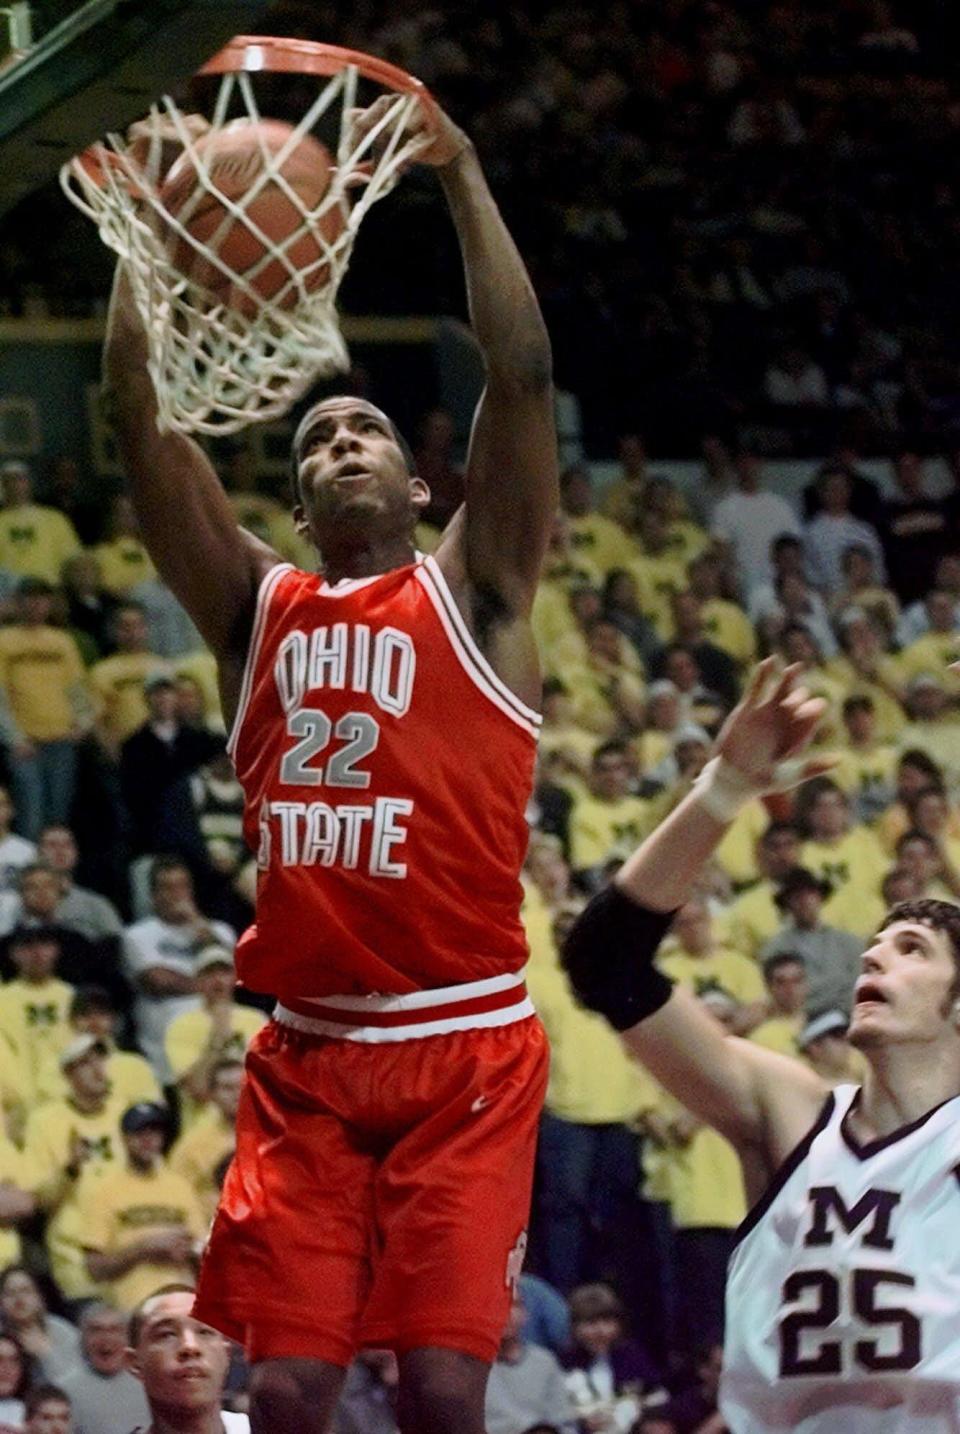 Ohio State's Michael Redd, now involved in community outreach in Columbus, was a star for the Buckeyes and the NBA's Milwaukee Bucks.